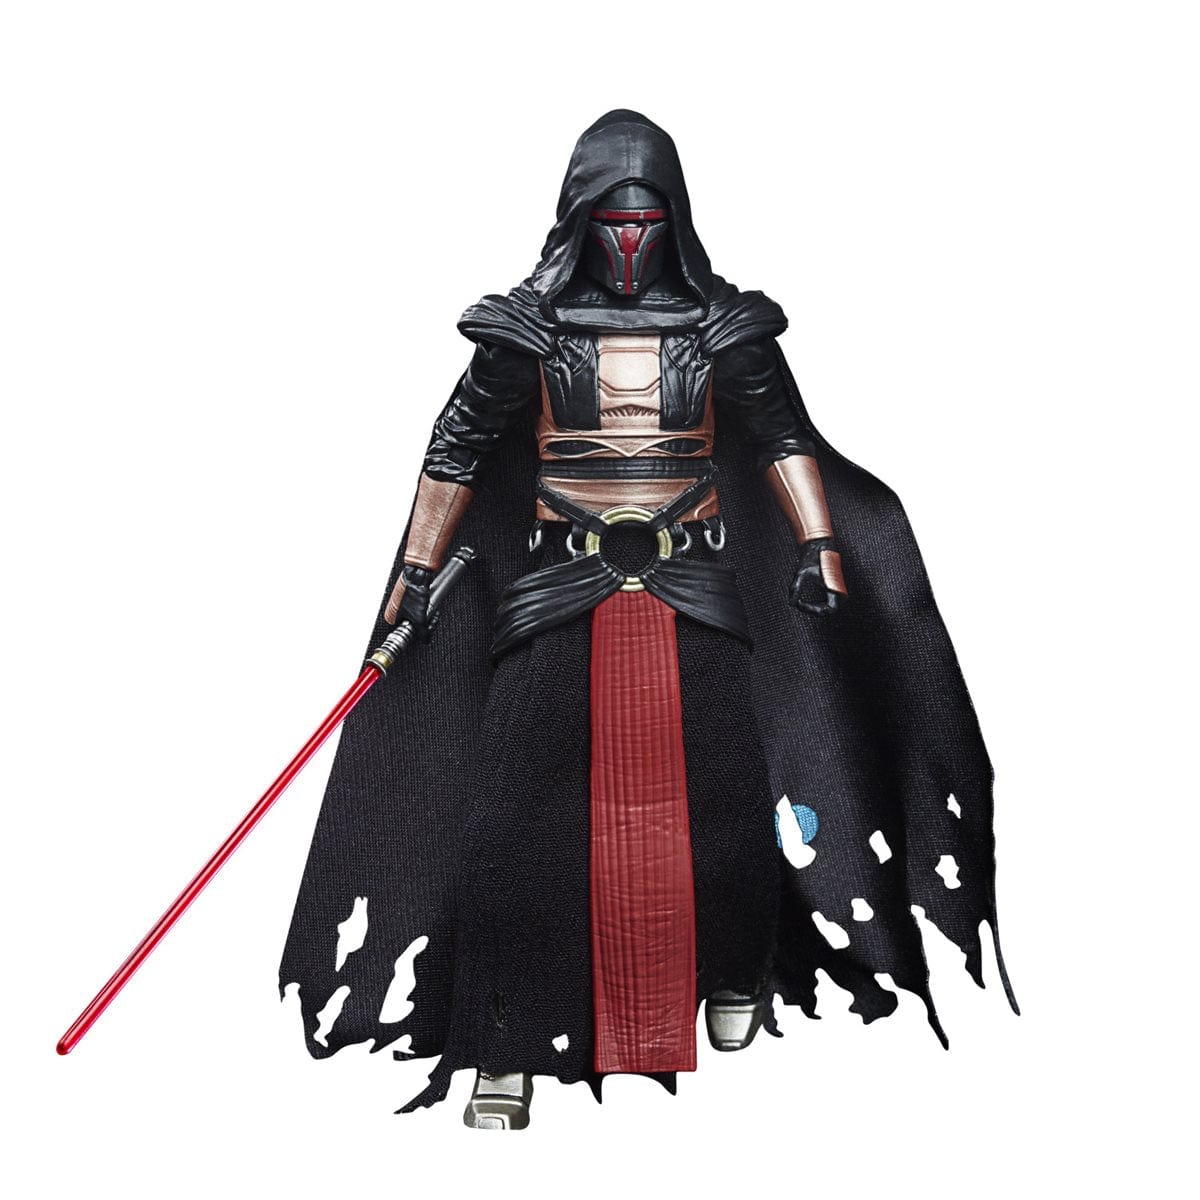 Star Wars The Black Series Archive Darth Revan 6-Inch Action Figure